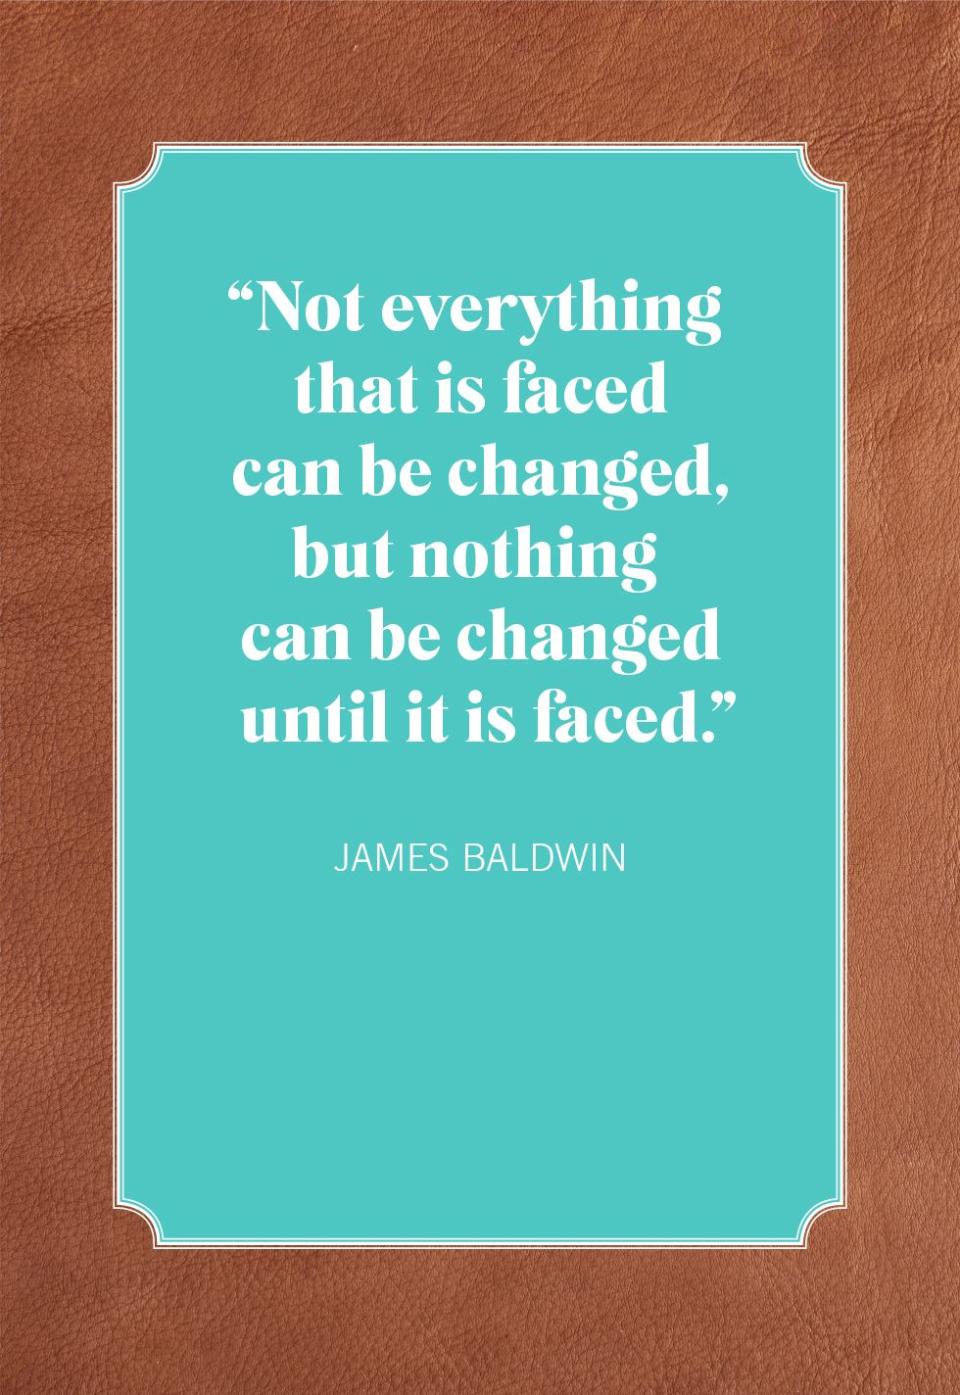 quotes about change baldwin